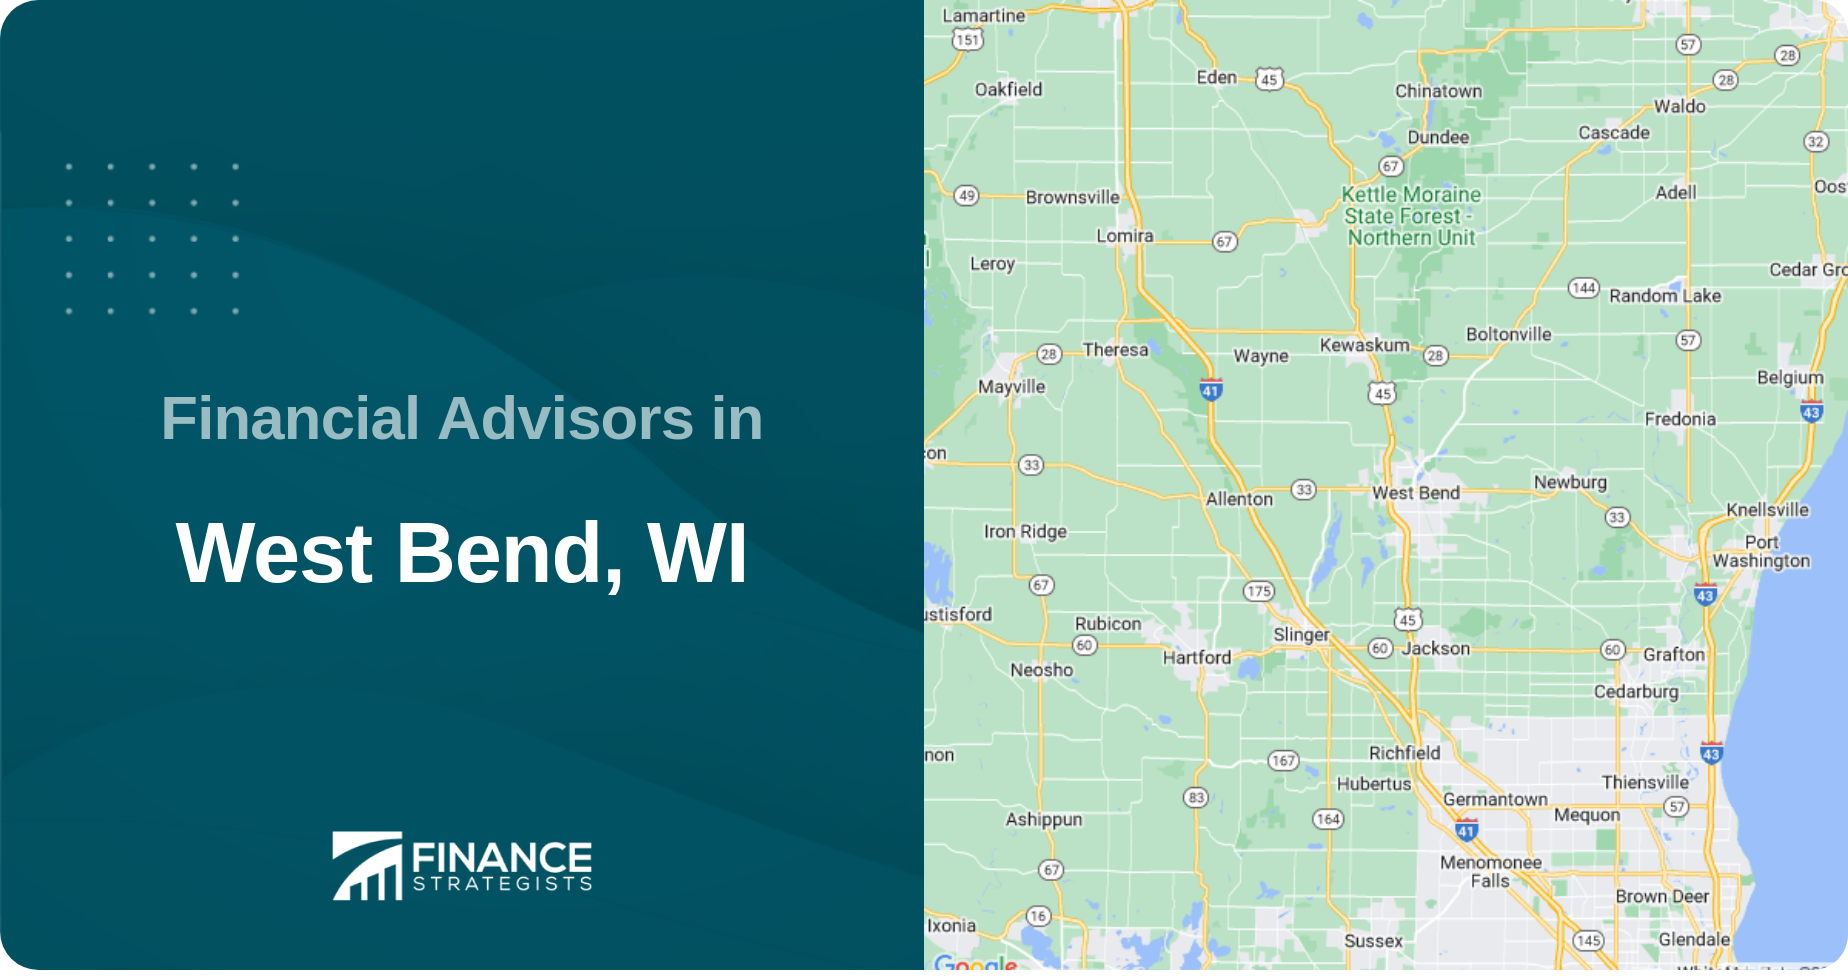 Financial Advisors in West Bend, WI